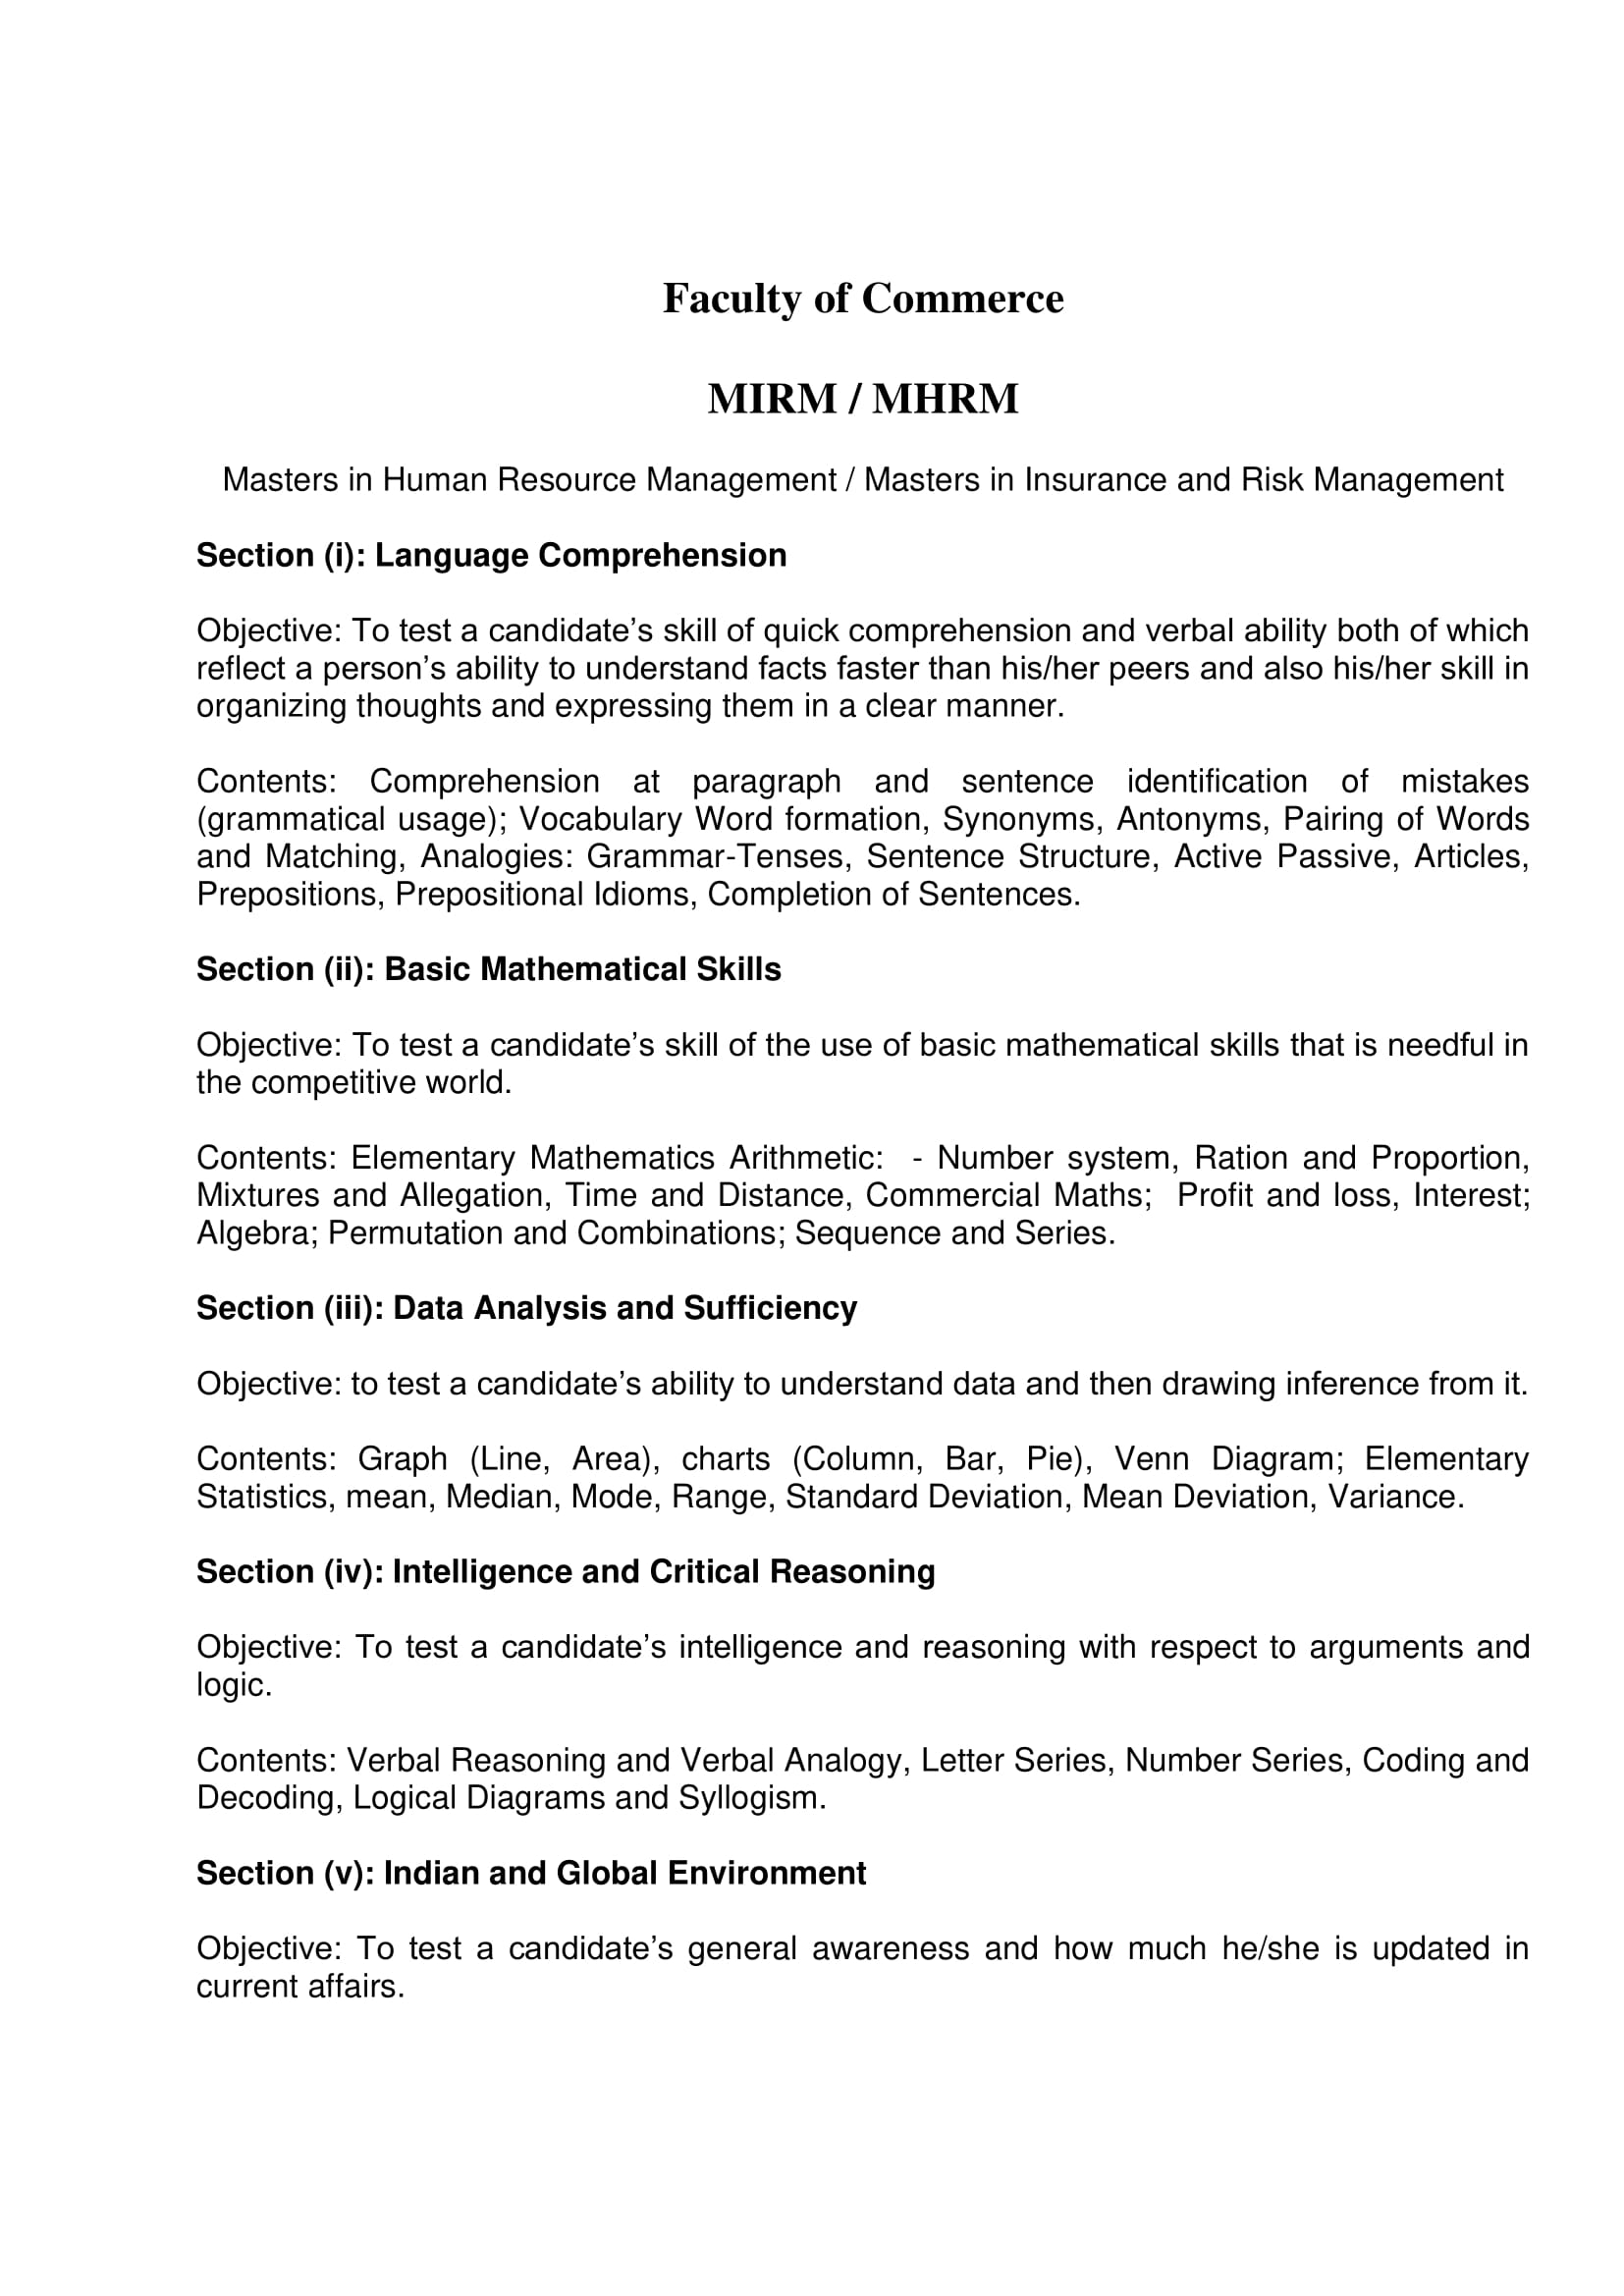 AMU Entrance Exam Syllabus for MIRM and MHRM in Human Resource Management and Insurance and Risk Management - Page 1